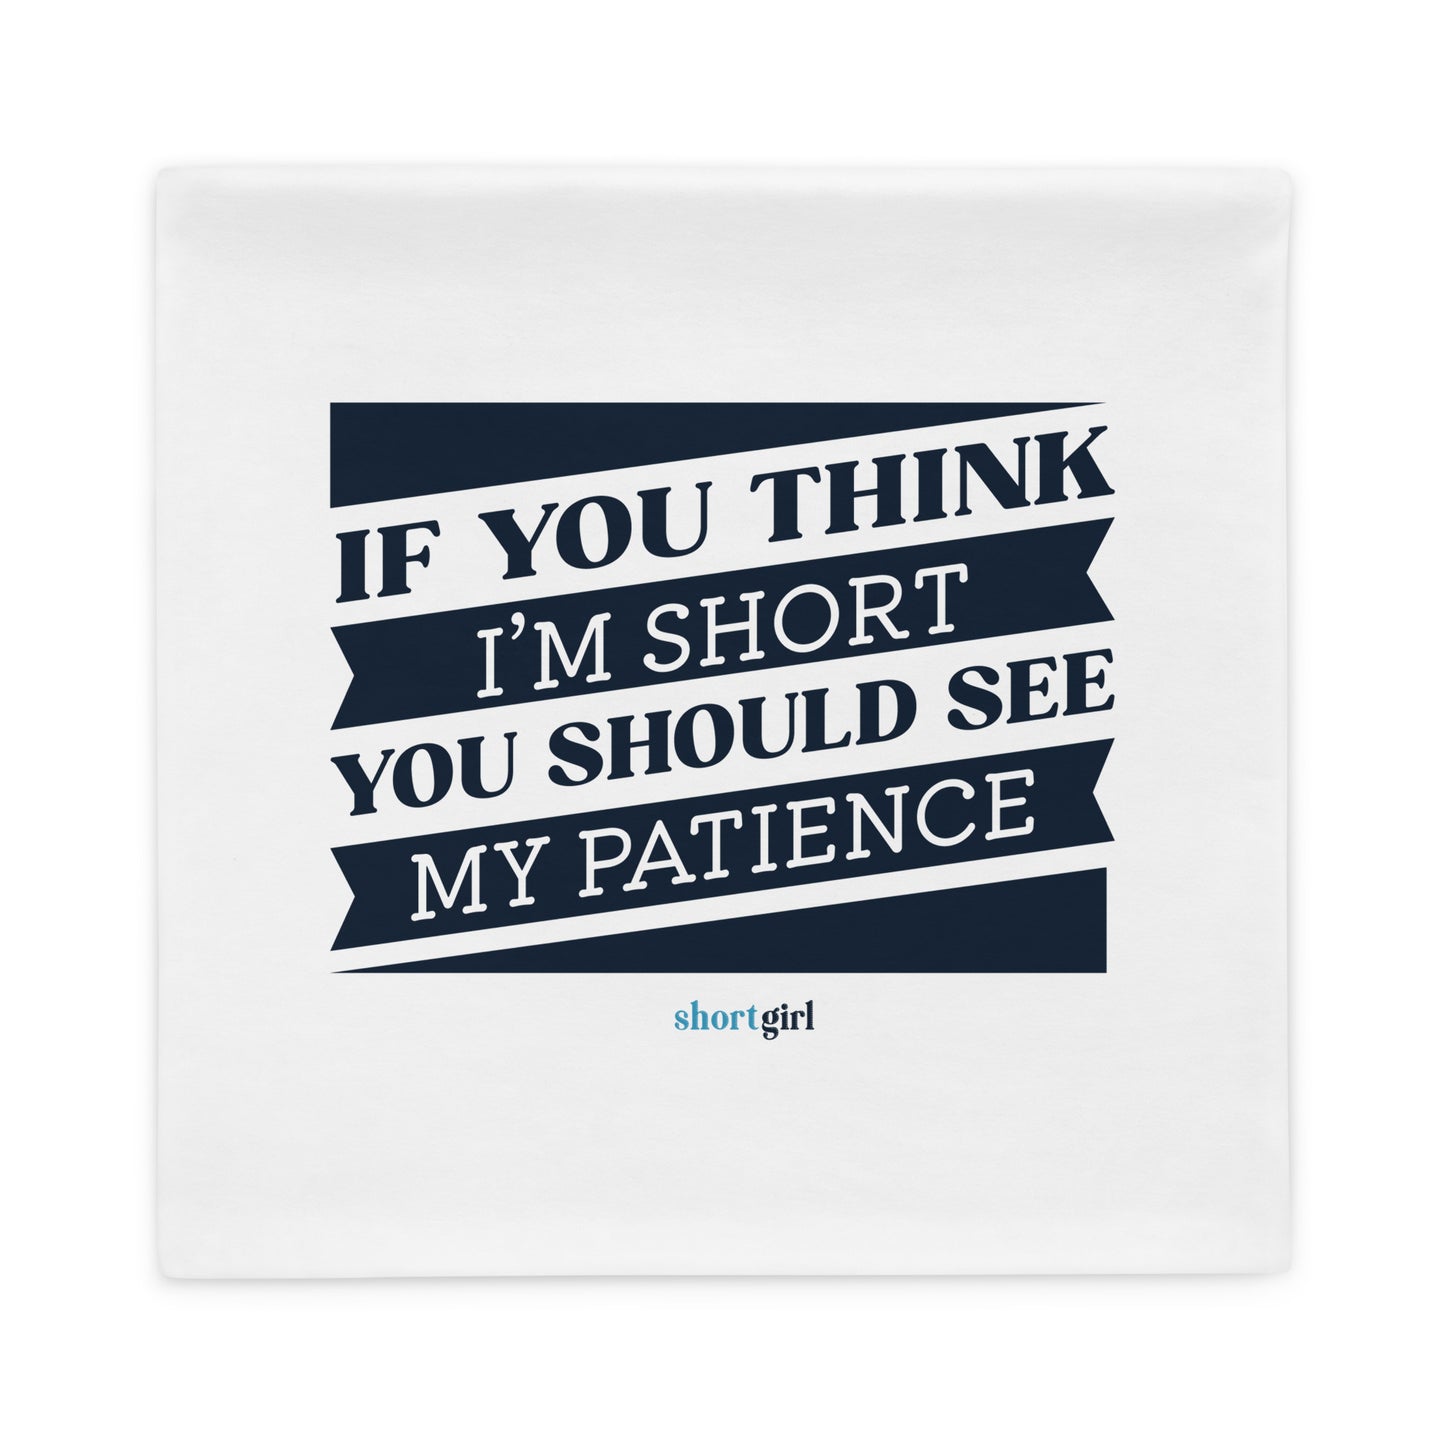 Pillow Case - If you think I'm short, you should see my patience